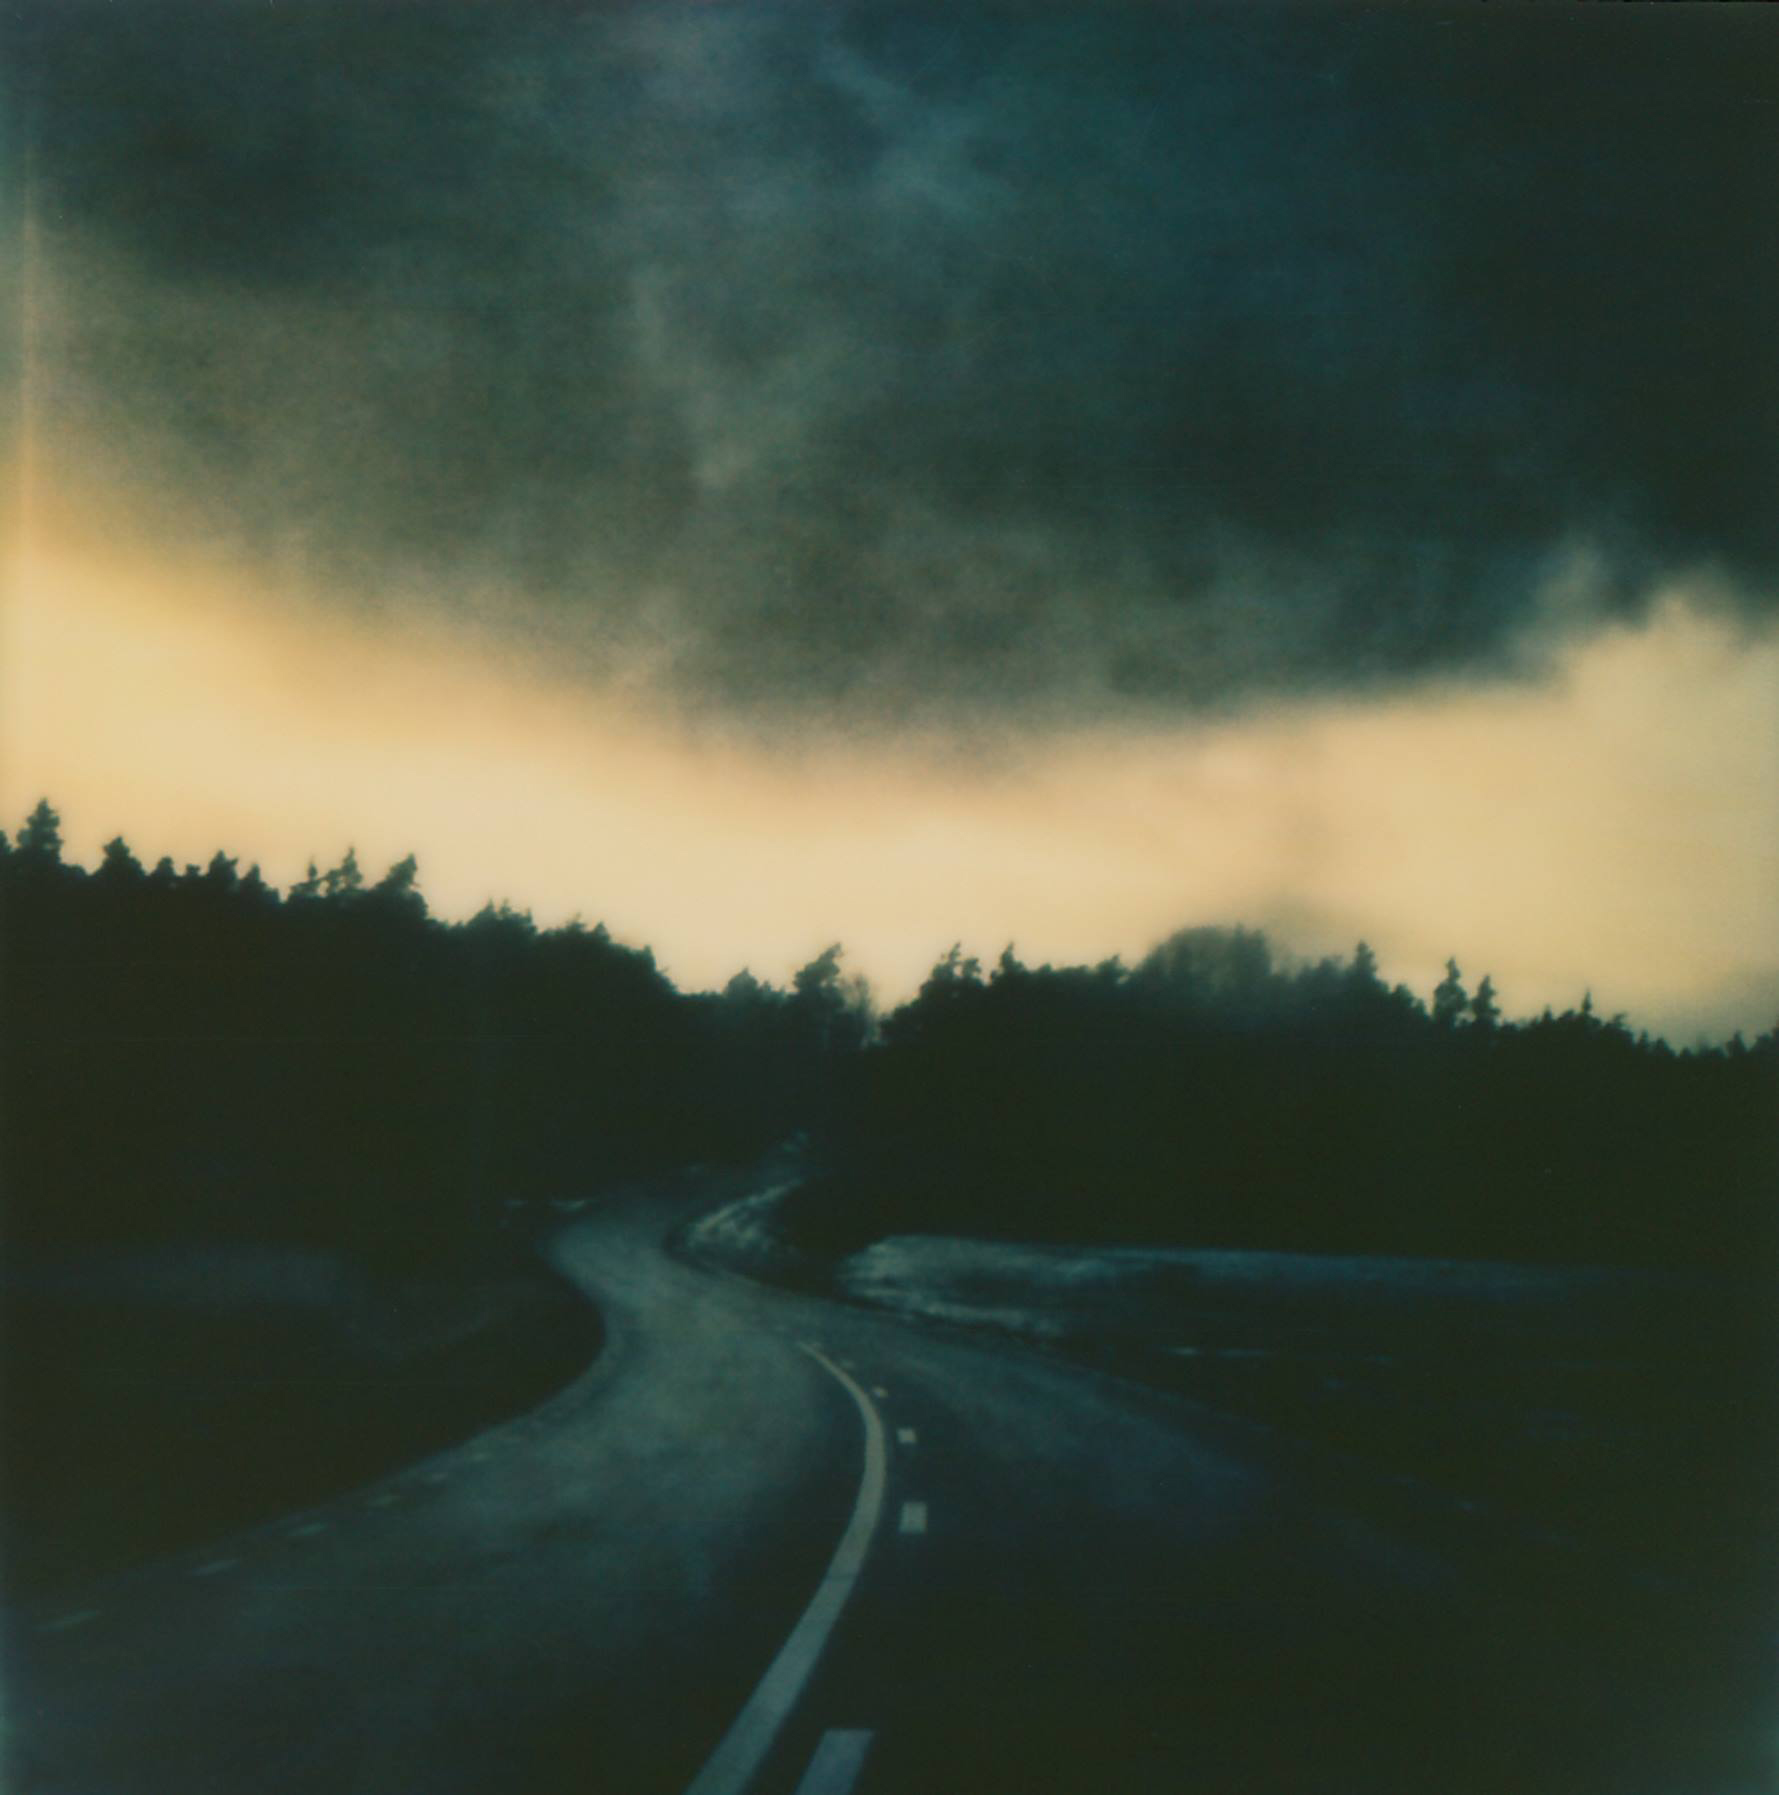 Road Dark Skies | Impossible Project Instant Lab | Impossible Project 70 Color Film | Per Forsström